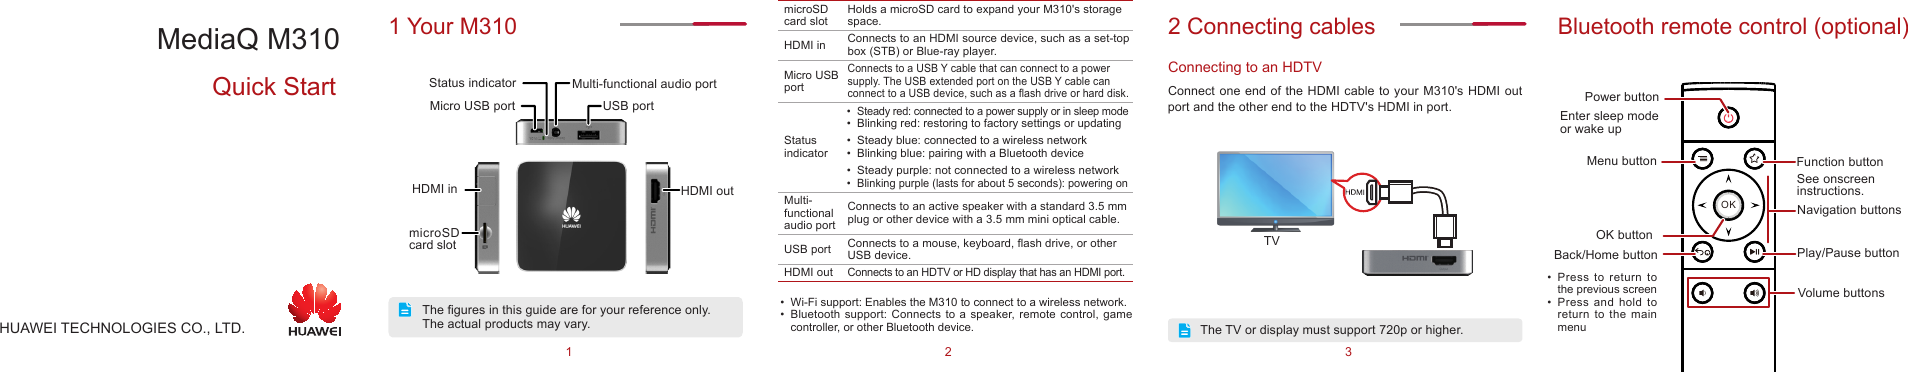 21 3MediaQ M310Quick StartHUAWEI TECHNOLOGIES CO., LTD.1 Your M310The gures in this guide are for your reference only.The actual products may vary.Multi-functional audio portMicro USB port USB portStatus indicatormicroSD card slotHDMI in HDMI outmicroSD card slotHolds a microSD card to expand your M310&apos;s storage space.HDMI in Connects to an HDMI source device, such as a set-top box (STB) or Blue-ray player.Micro USBportConnects to a USB Y cable that can connect to a power supply. The USB extended port on the USB Y cable can connect to a USB device, such as a ash drive or hard disk.Status indicator•  Steady red: connected to a power supply or in sleep mode•  Blinking red: restoring to factory settings or updating•  Steady blue: connected to a wireless network•  Blinking blue: pairing with a Bluetooth device•  Steady purple: not connected to a wireless network•  Blinking purple (lasts for about 5 seconds): powering on Multi-functional audio portConnects to an active speaker with a standard 3.5 mmplug or other device with a 3.5 mm mini optical cable.USB port Connects to a mouse, keyboard, ash drive, or other USB device.HDMI outConnects to an HDTV or HD display that has an HDMI port. •  Wi-Fi support: Enables the M310 to connect to a wireless network.•  Bluetooth support: Connects to a speaker, remote  control,  game controller, or other Bluetooth device. The TV or display must support 720p or higher.TV2 Connecting cablesConnecting to an HDTVConnect one end of the HDMI cable to your M310&apos;s HDMI out port and the other end to the HDTV&apos;s HDMI in port.Bluetooth remote control (optional)OKPower buttonMenu buttonOK buttonBack/Home buttonVolume buttonsPlay/Pause buttonNavigation buttonsFunction buttonEnter sleep mode or wake up•  Press  to  return  to the previous screen•  Press  and  hold  to  return  to  the  main menuSee onscreen    instructions.